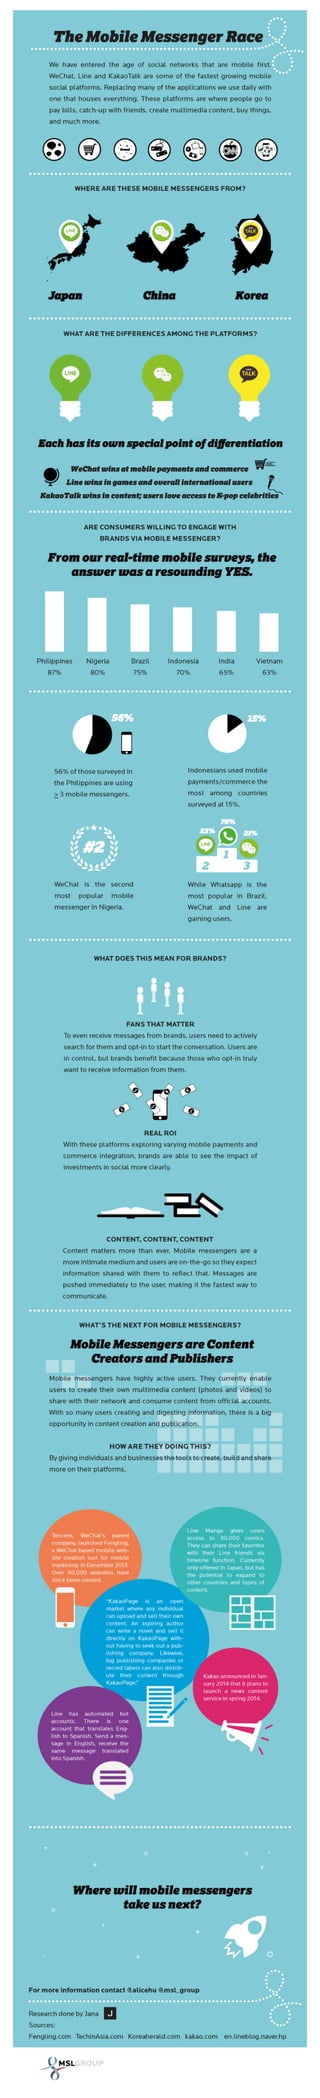 Infographic: The Mobile Messenger Race